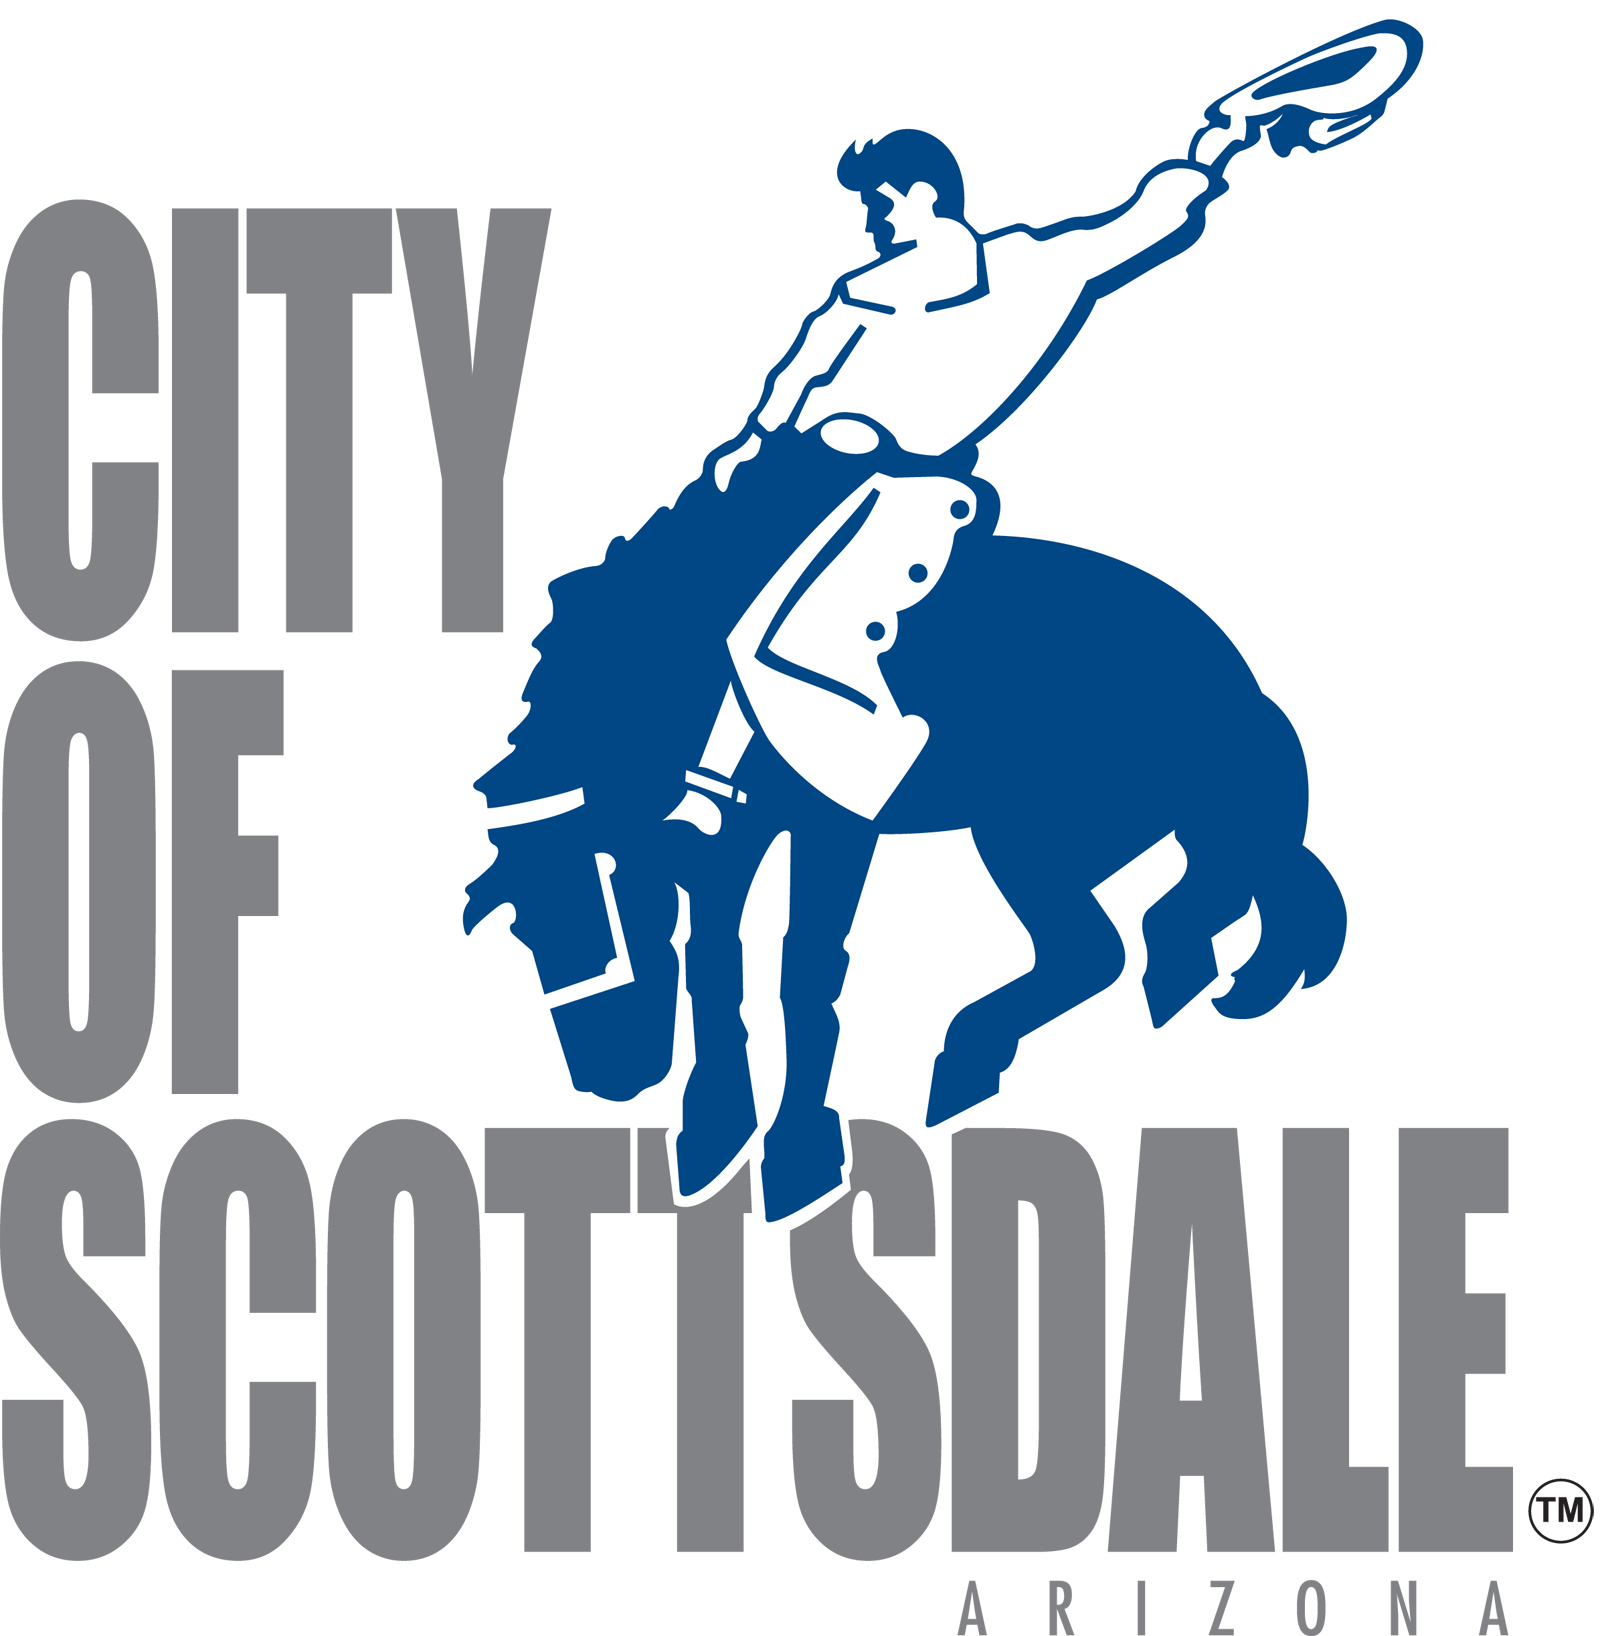 The Parks and Recreation logo for the city of Scottsdale, Arizona.